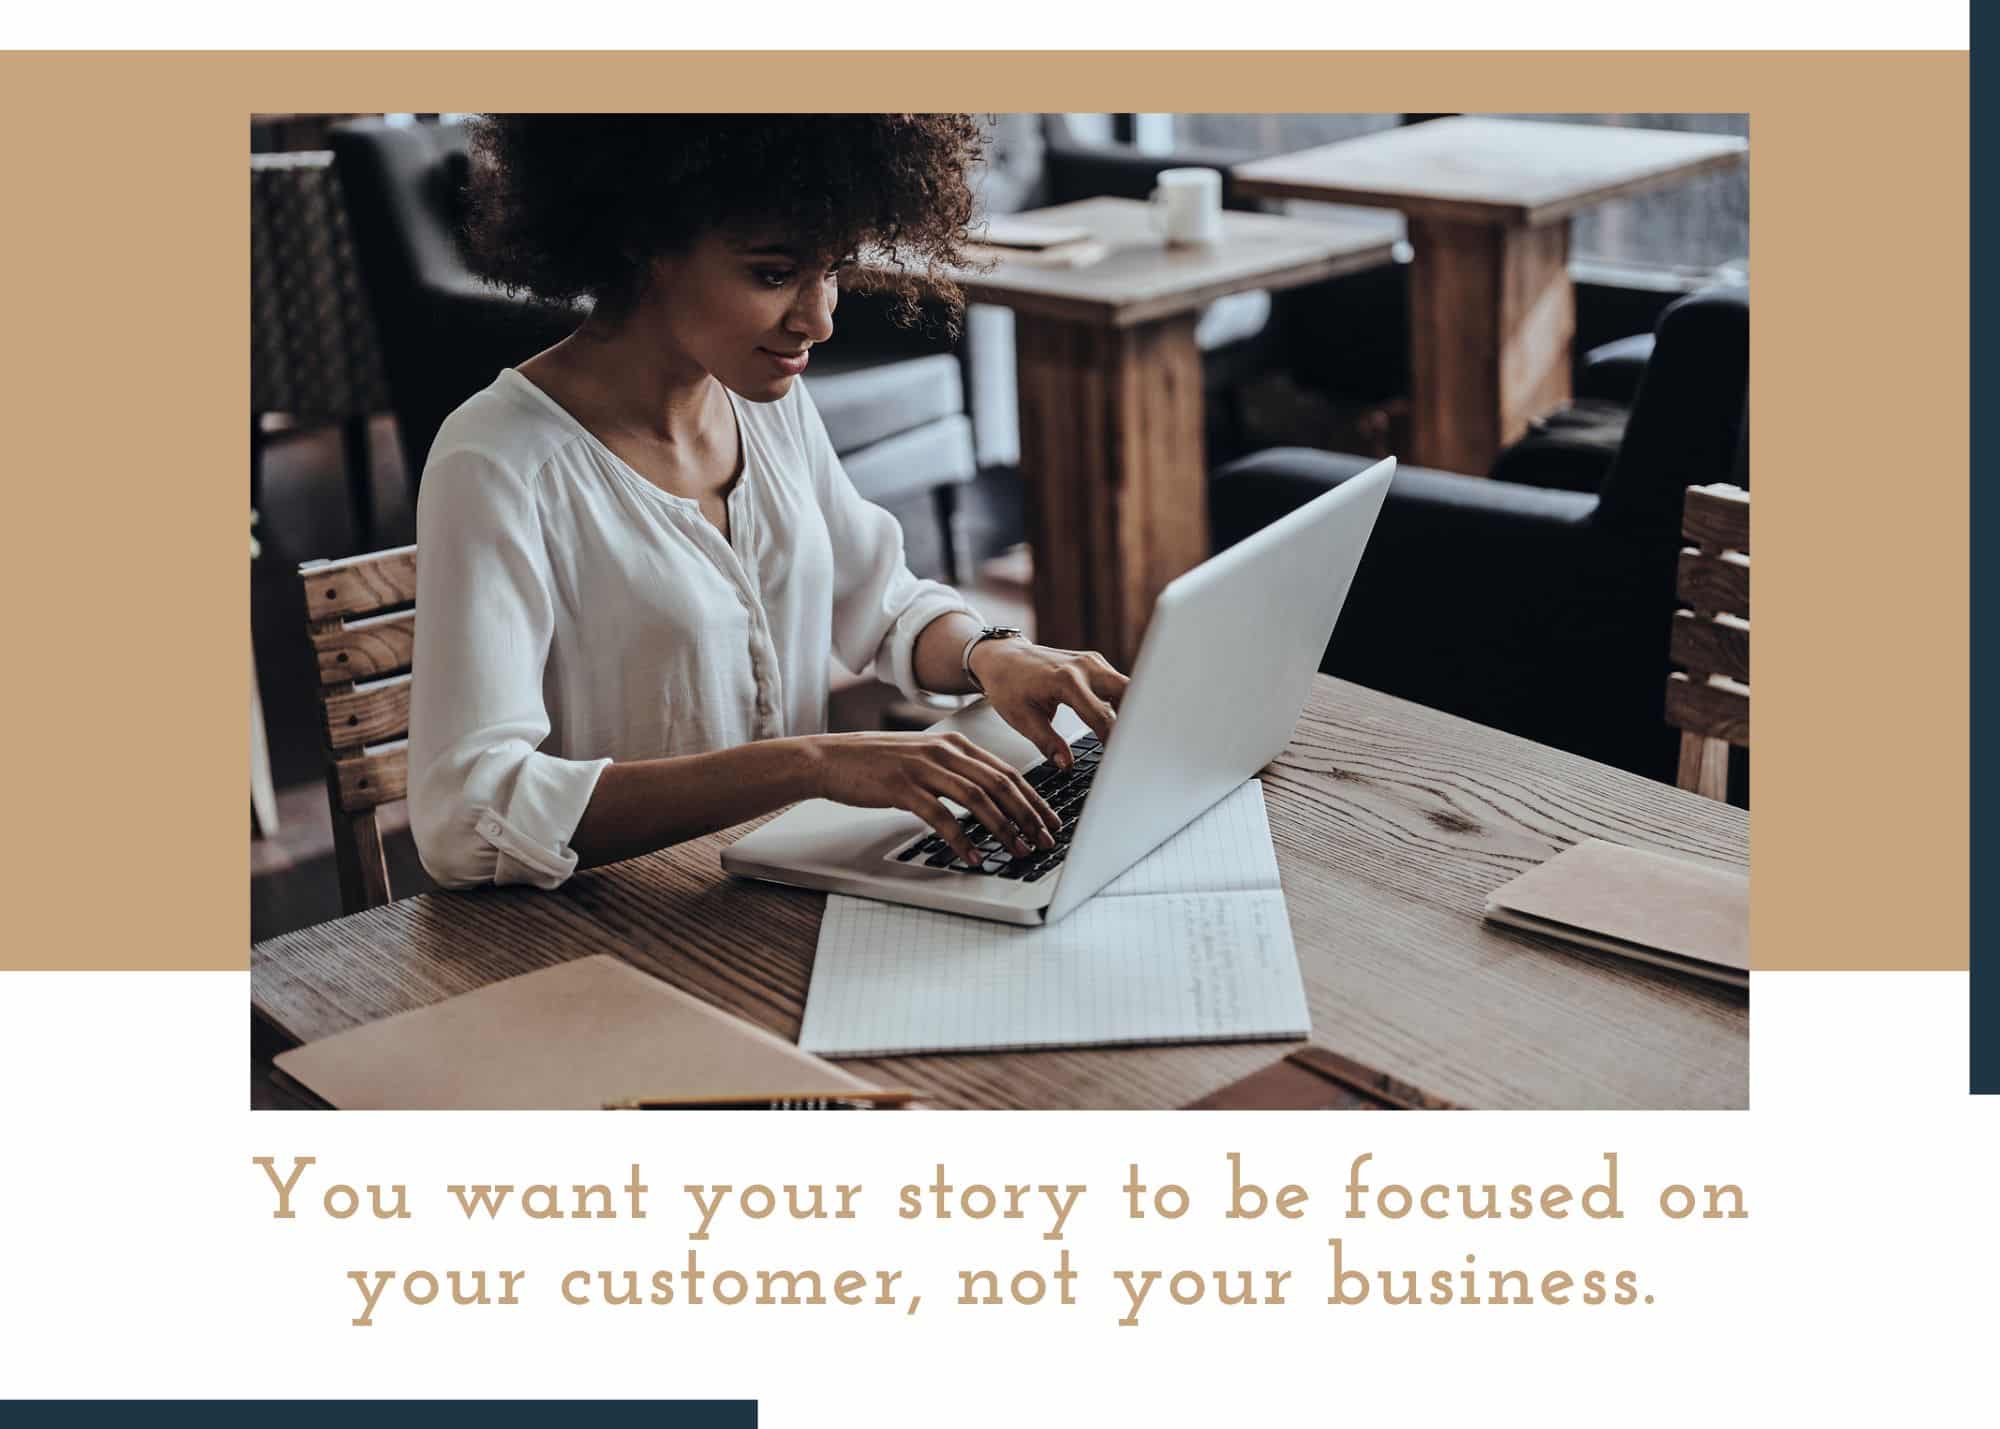 Focus your marketing on your customers needs